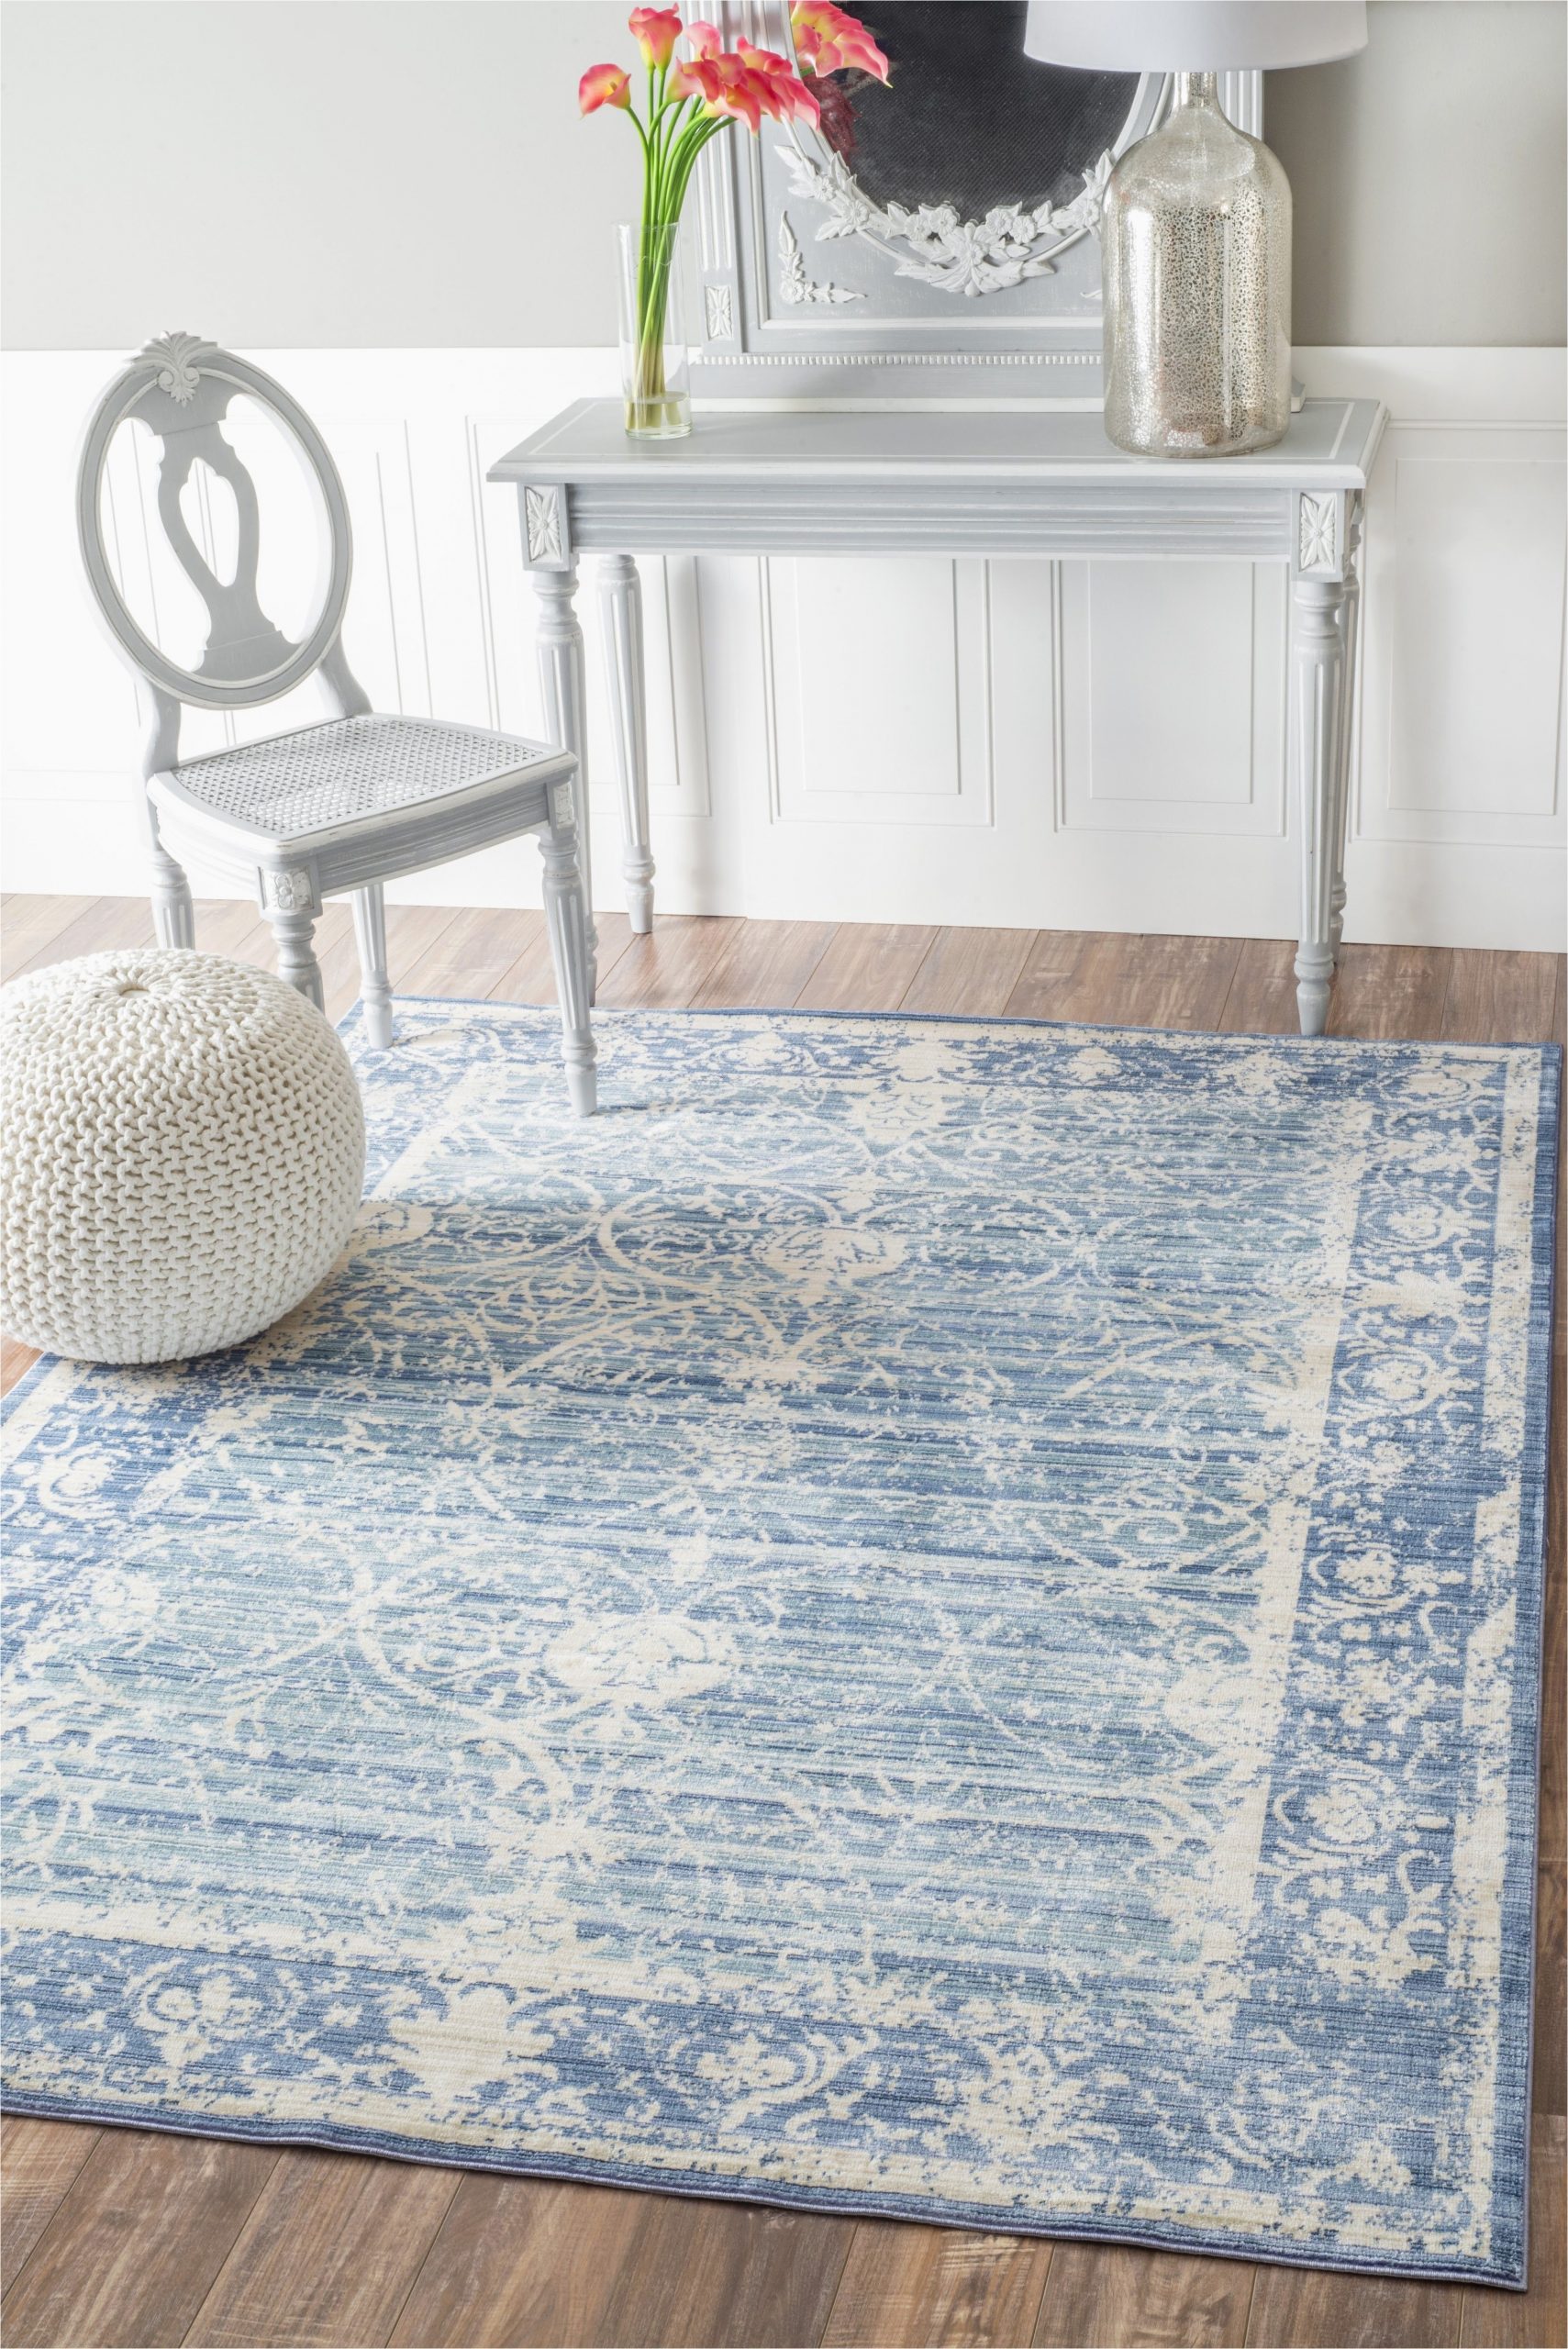 White Rug with Blue A Fabulous Blue and White Rug From One Of Rugs Usas New